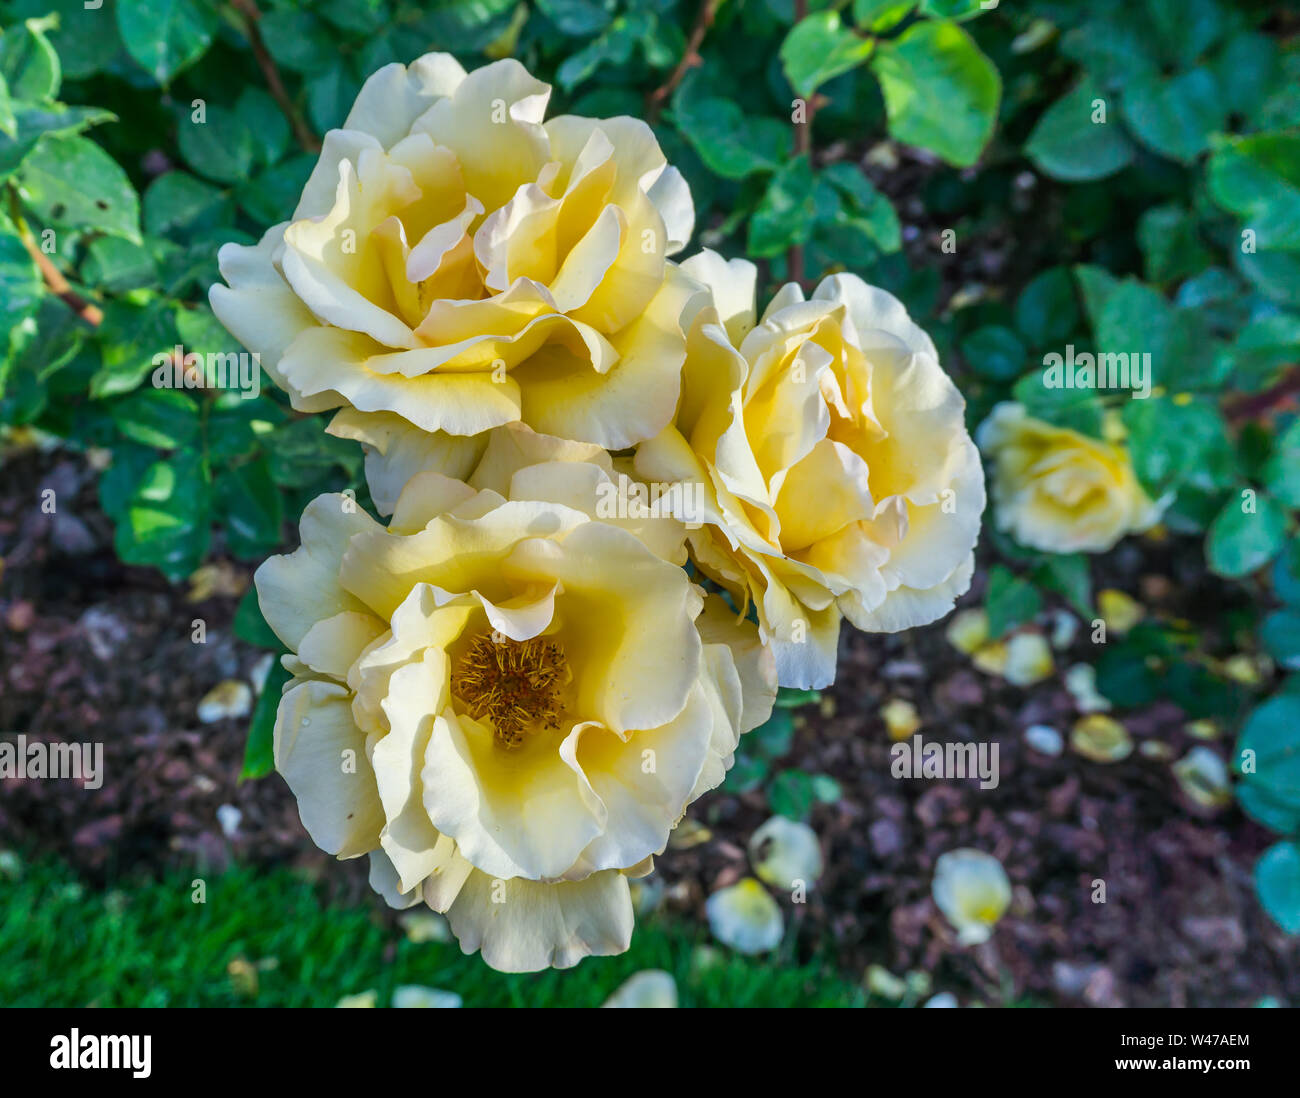 A close-up shot of a cluster of yellow roses at Point Defiance Park in Tacoma, Washington. Stock Photo